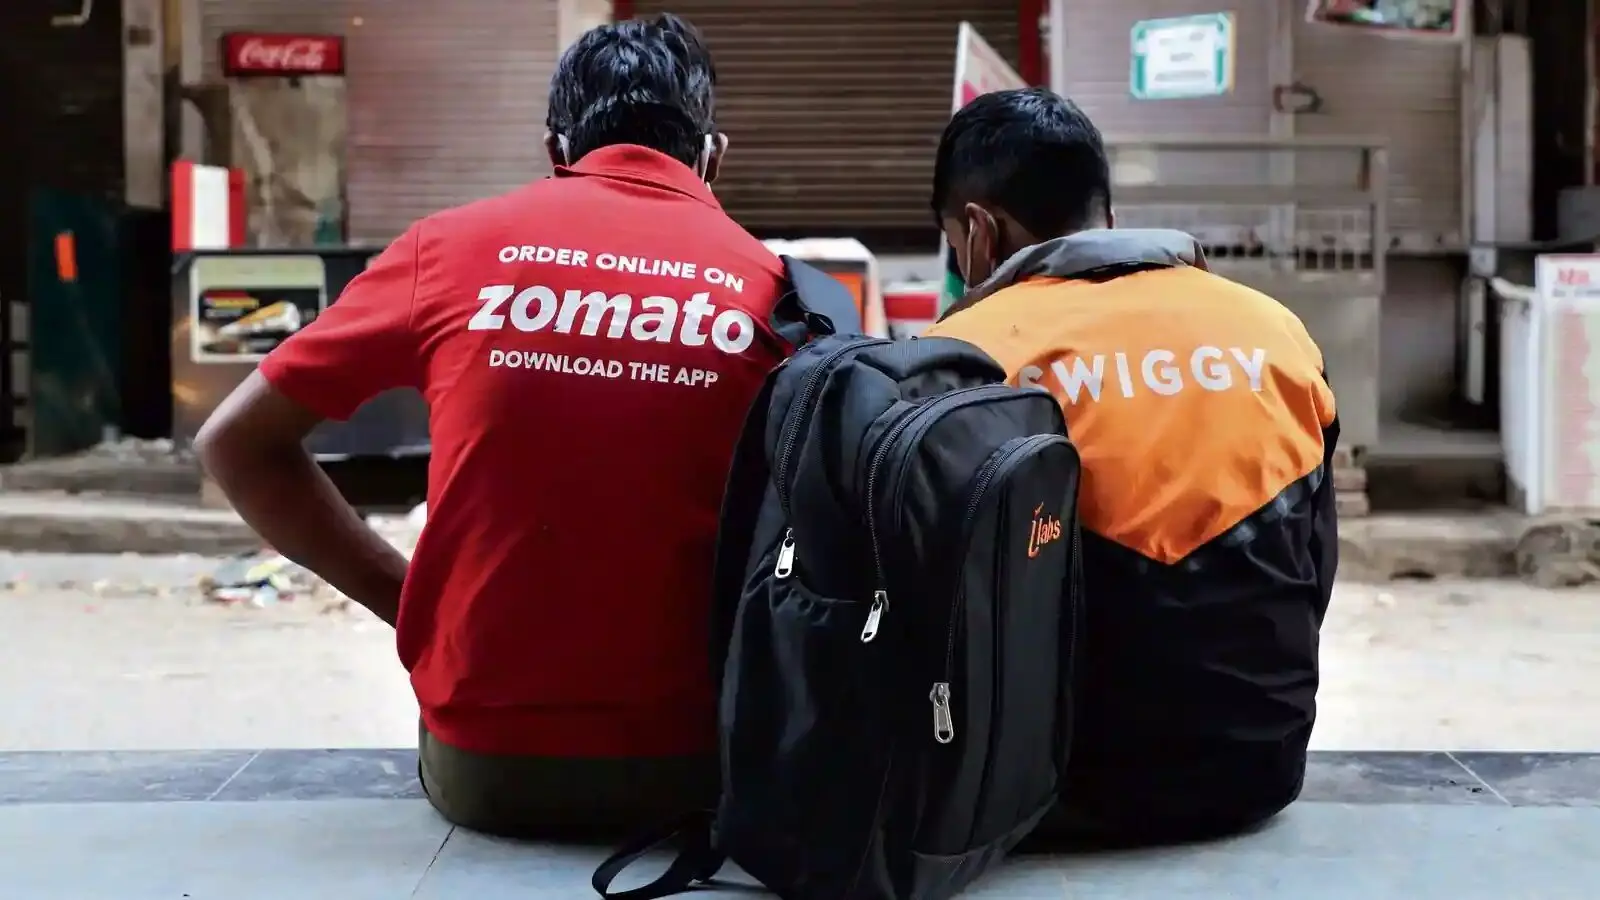 Swiggy and Zomato to charge extra 5% for food delivery from Jan 2022